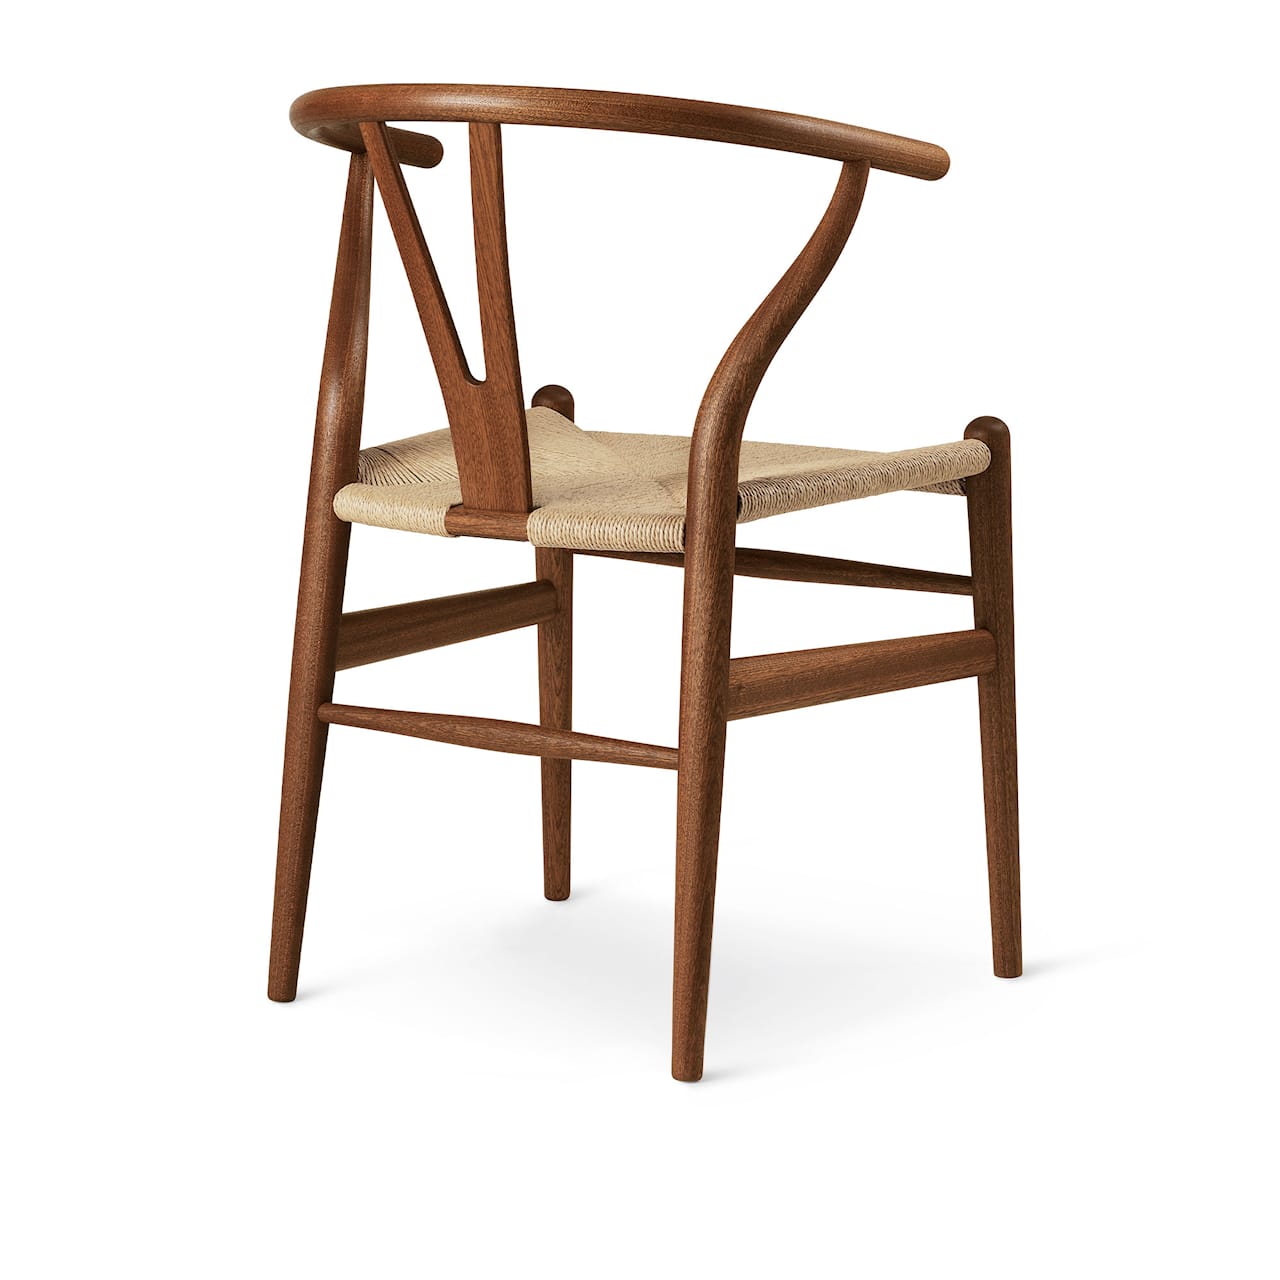 CH24 Y chair - Mahogany/Natural braided paper cord